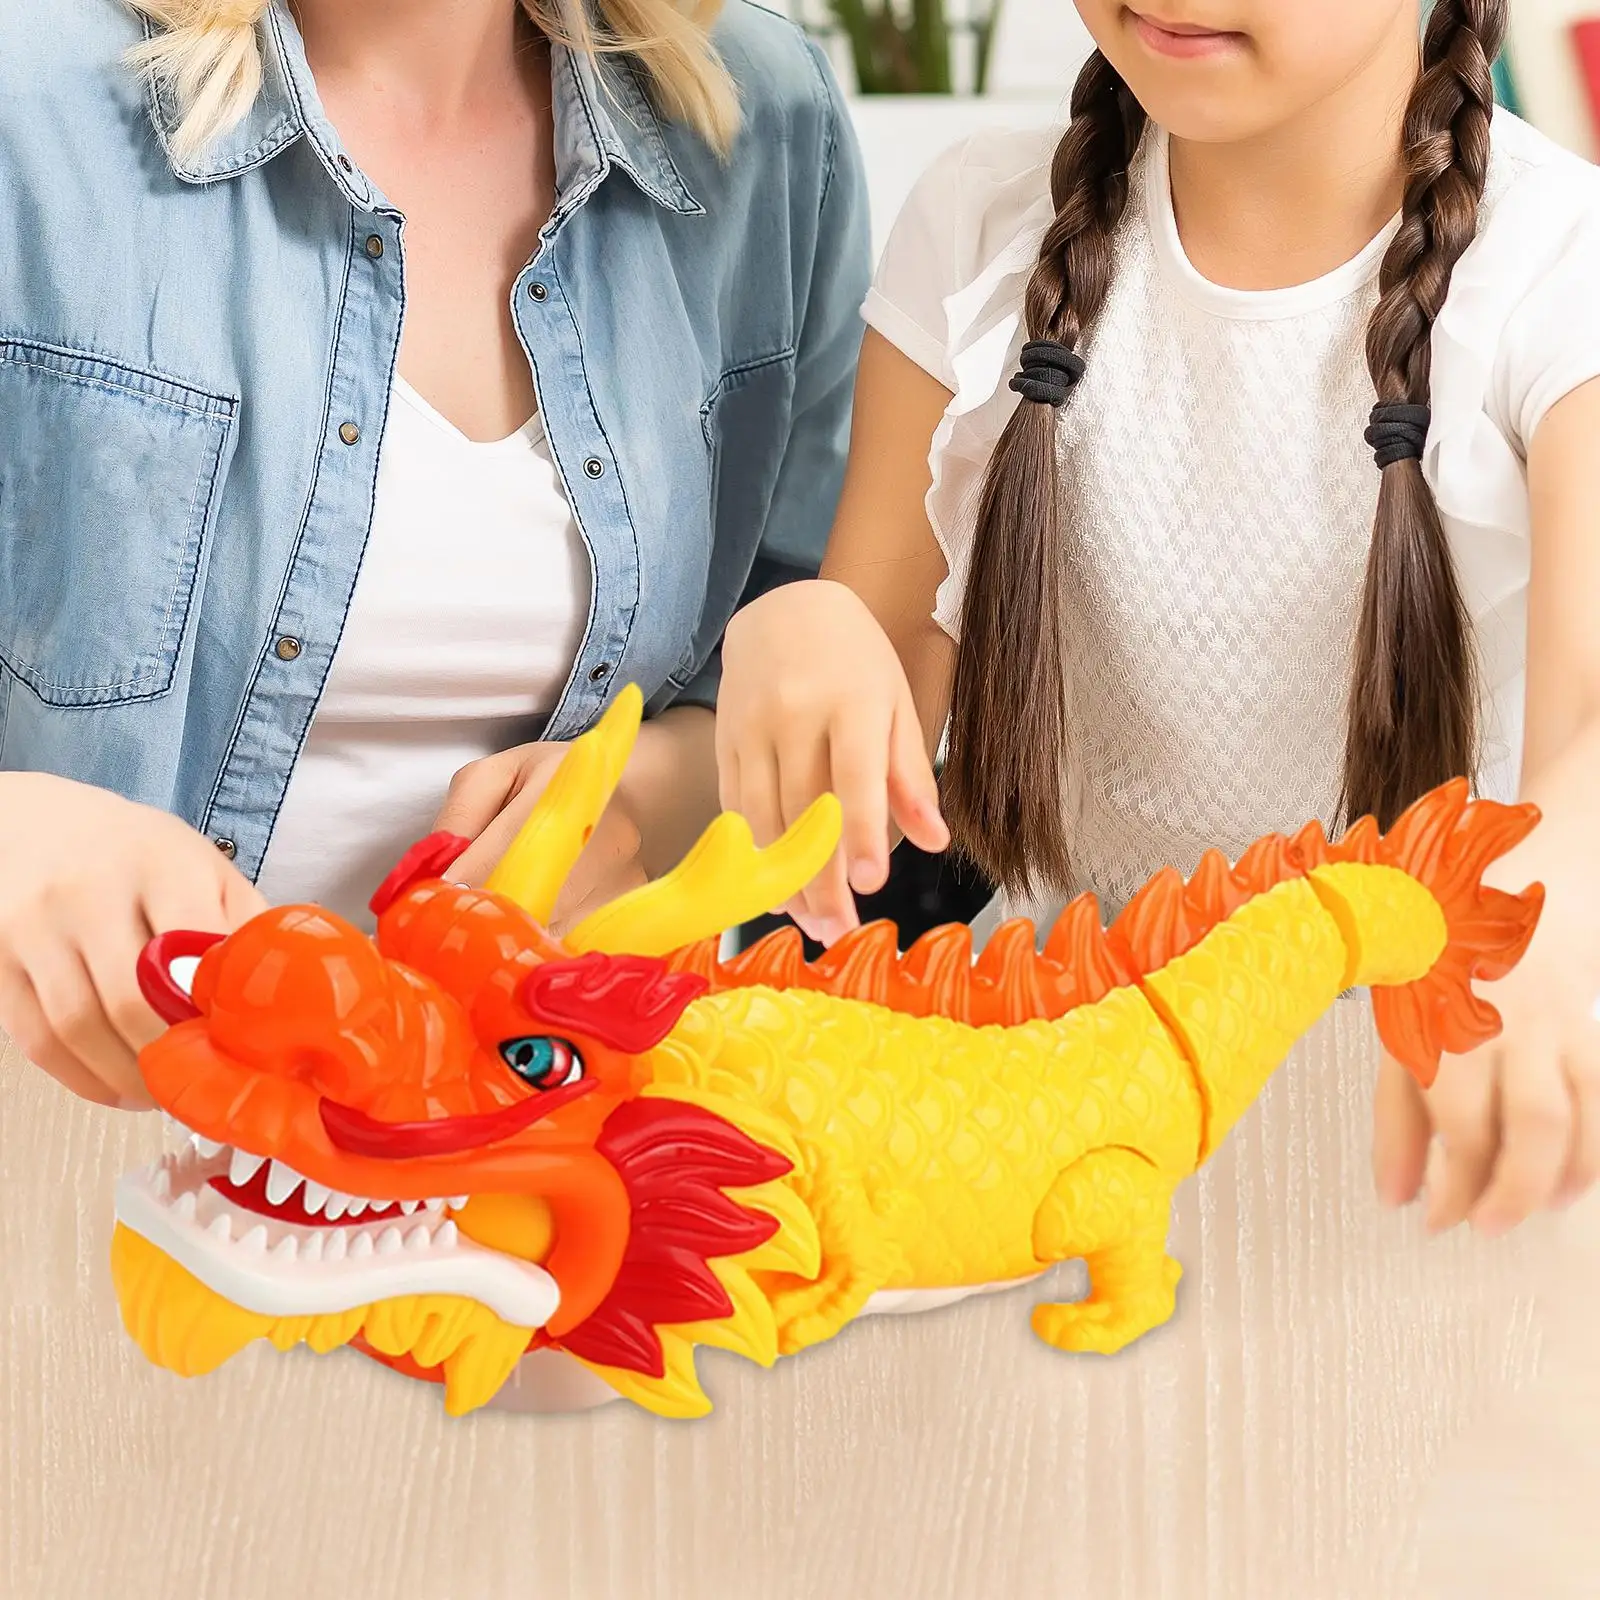 Eletric Dragon Toy Educational Learning Outdoor Bathroom Novelty Birthday Gifts Realistic Infant Toy for Age 8-12 Children Girls